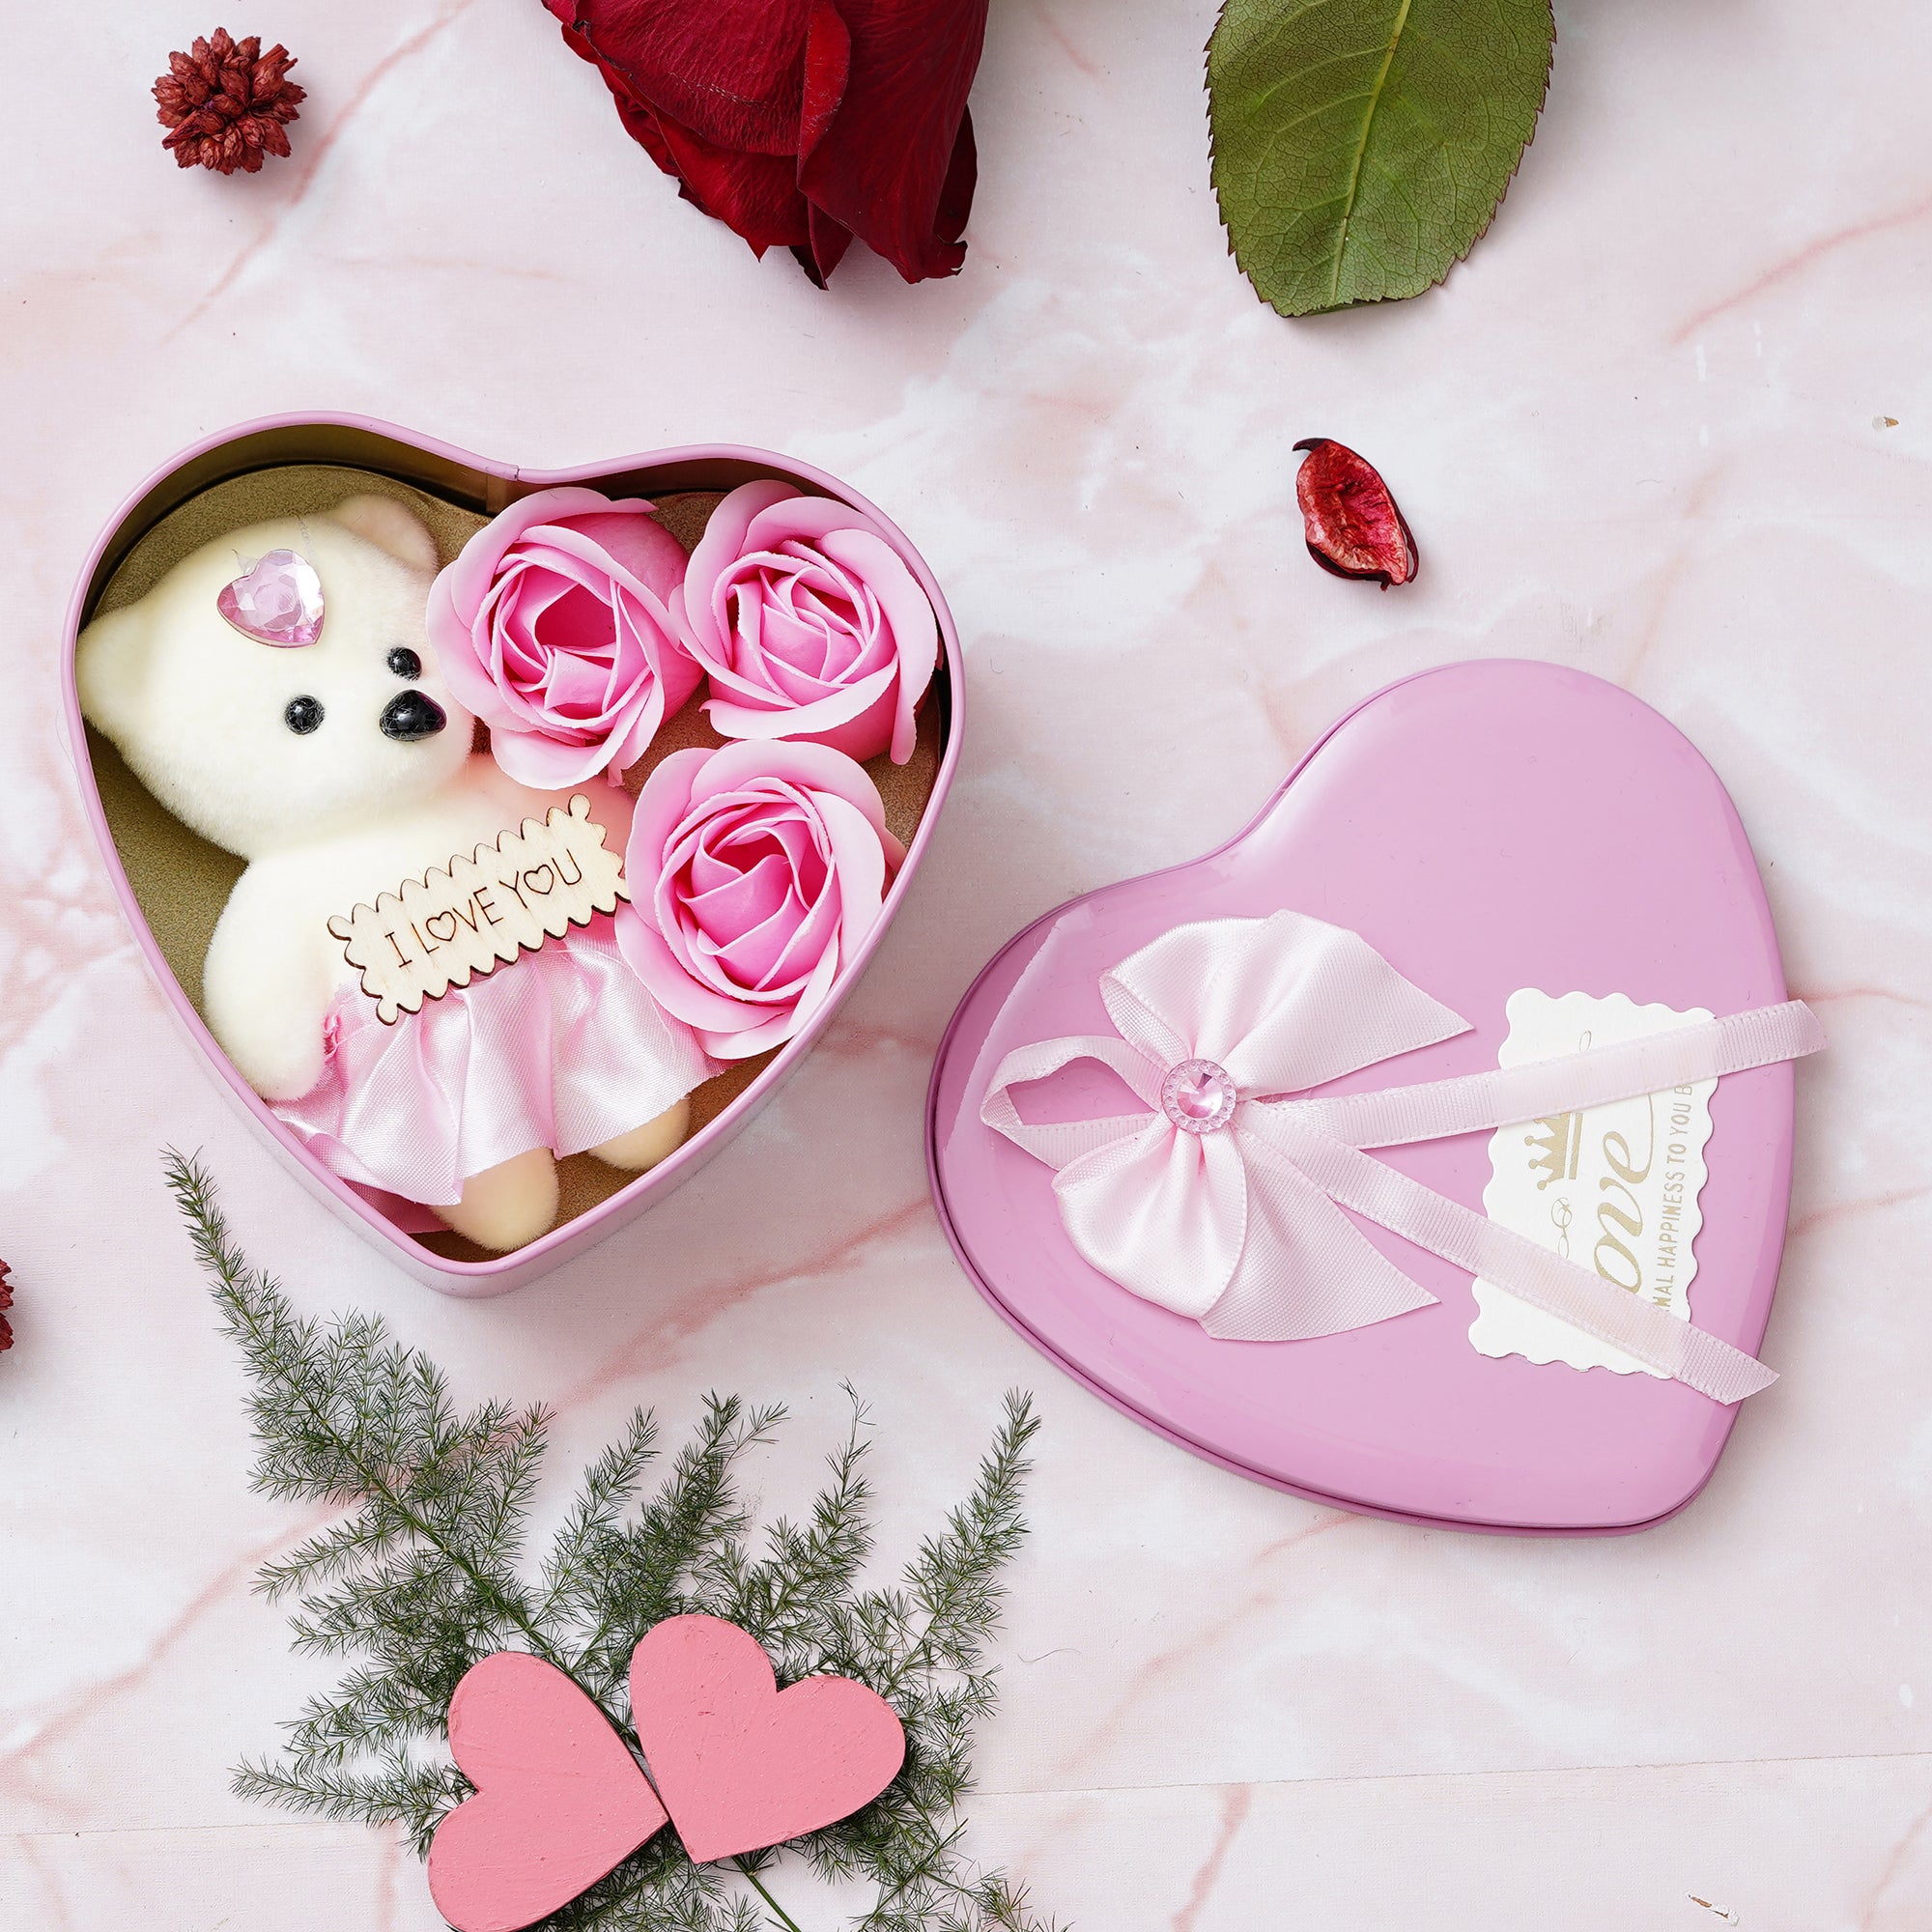 Valentine Combo of Card, "Things I Love About You" Puzzle Wooden Gift Set, Pink Heart Shaped Gift Box with Teddy and Roses 5